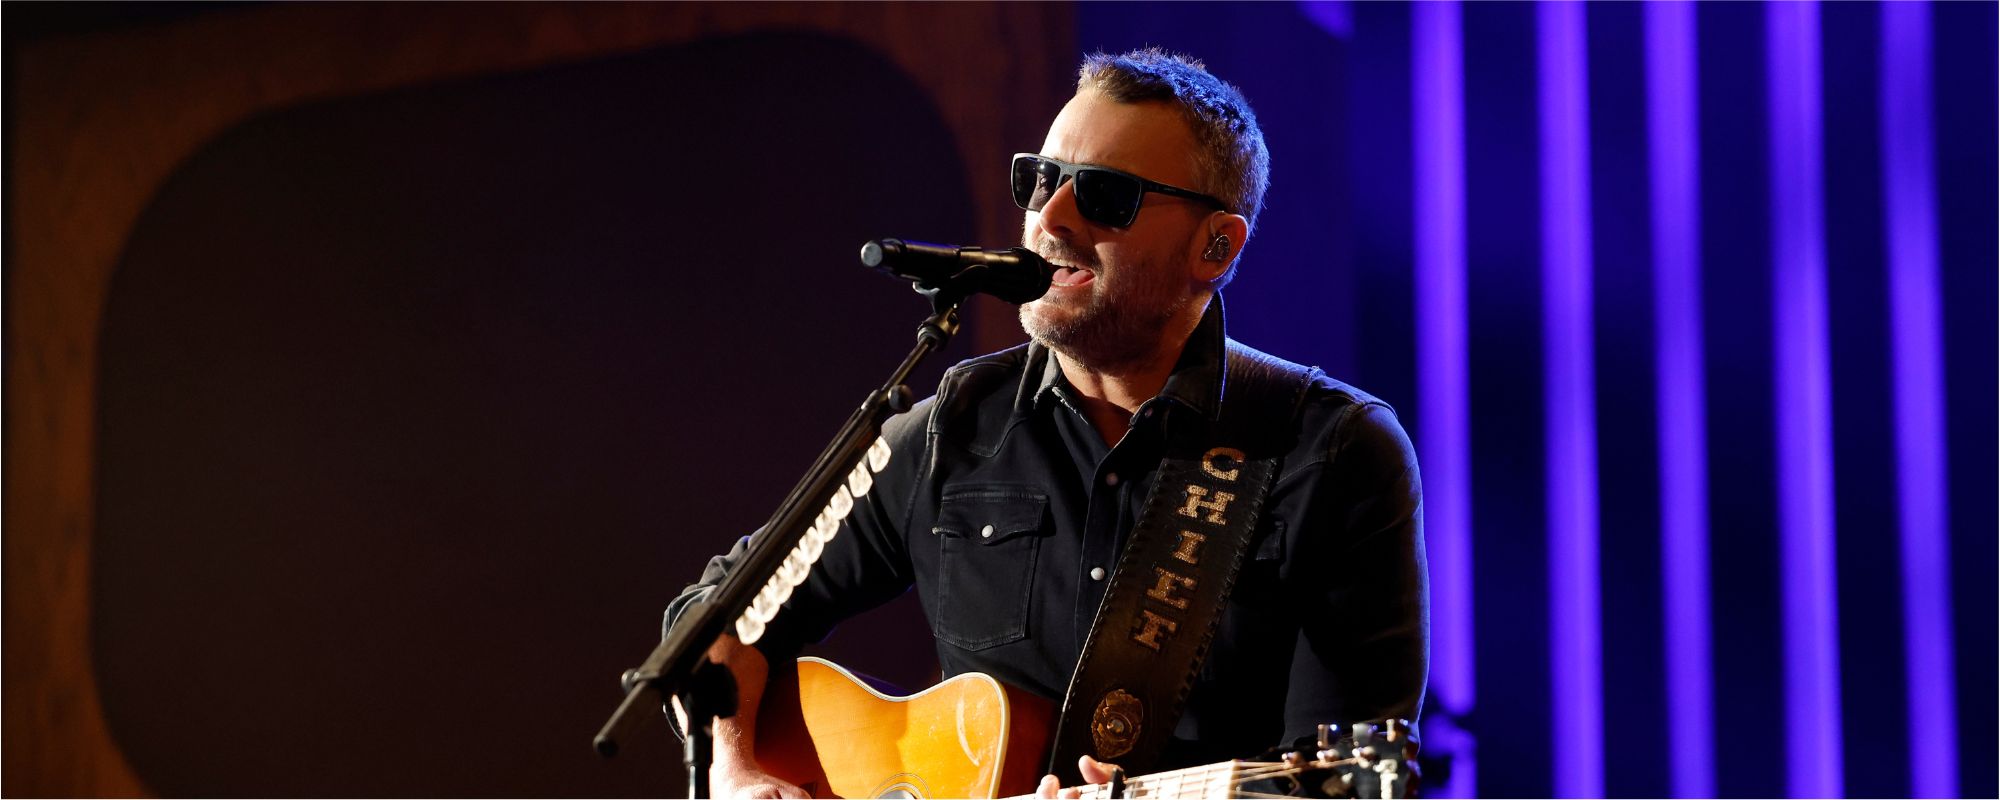 Eric Church Shines at Country Music Hall of Fame and Museum’s Artist-In-Residence